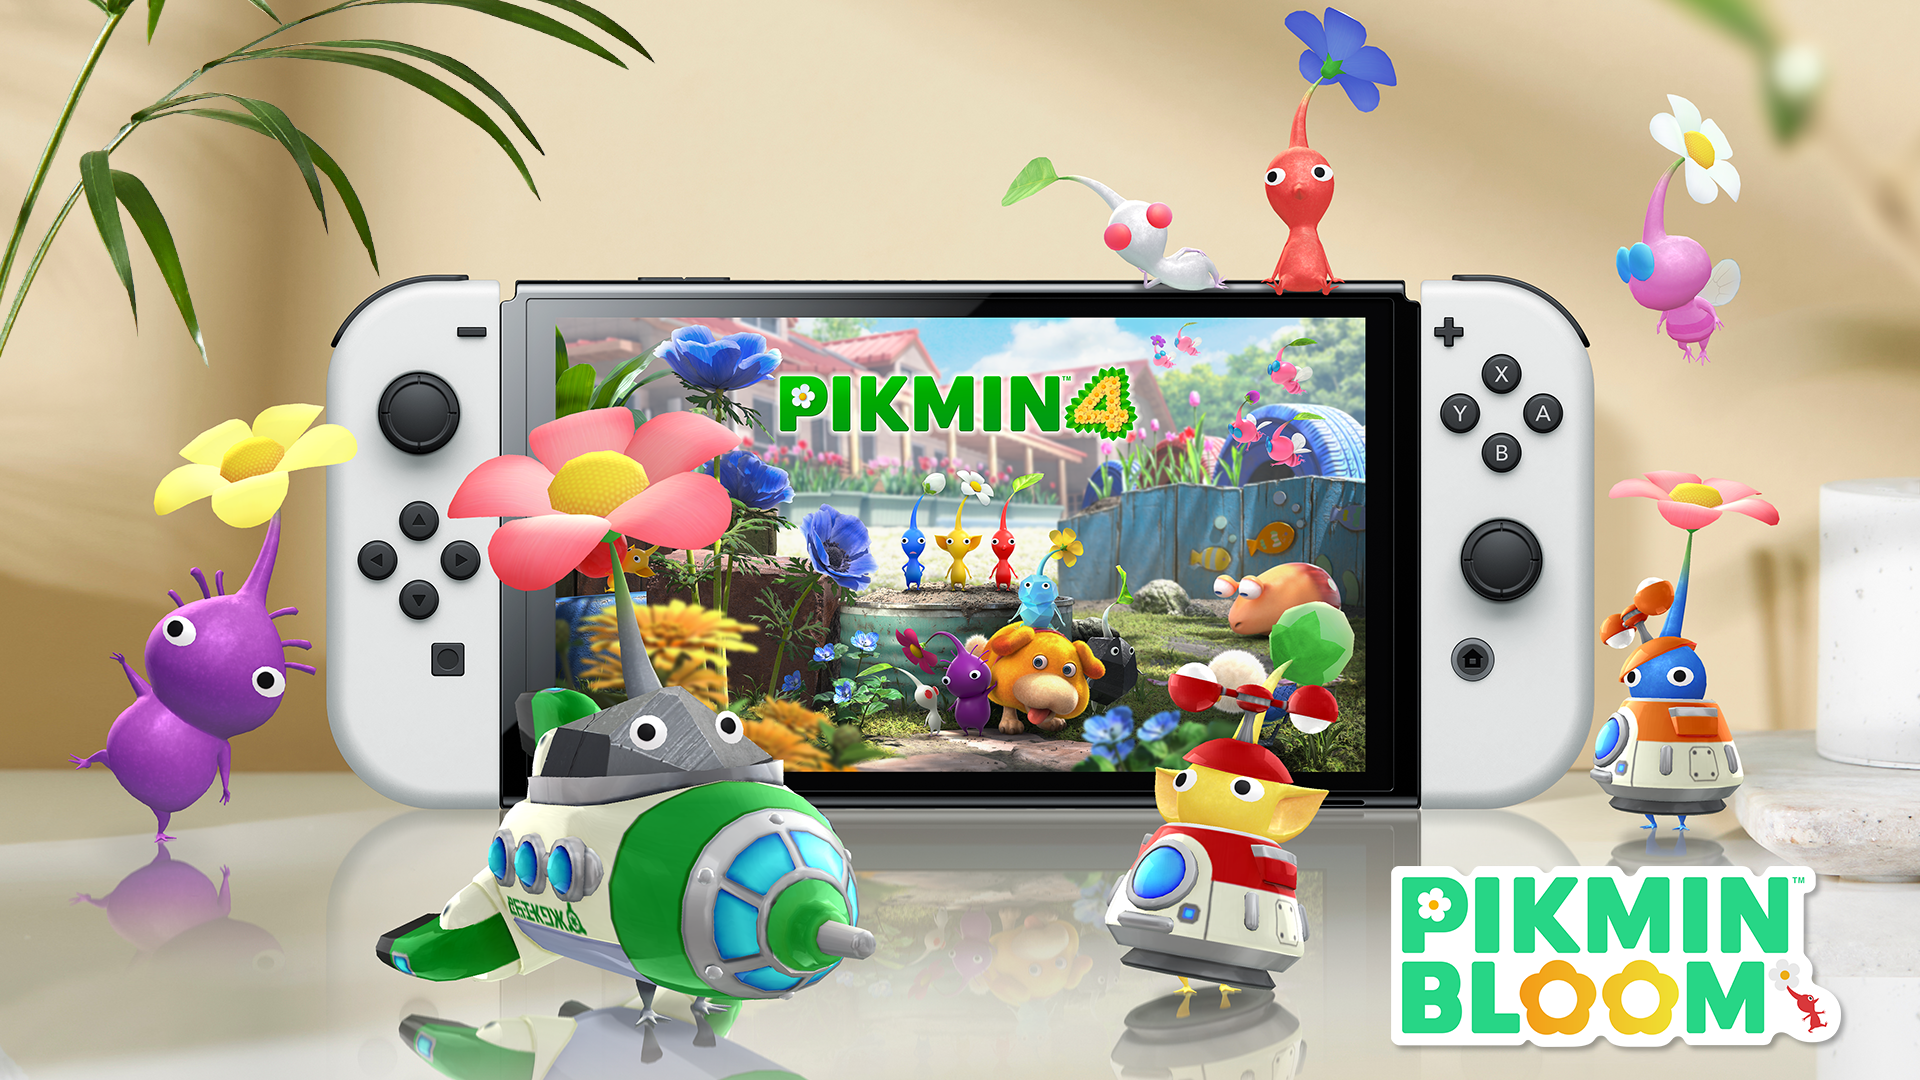 Pikmin Bloom celebrates Pikmin 4 launch with space-themed event